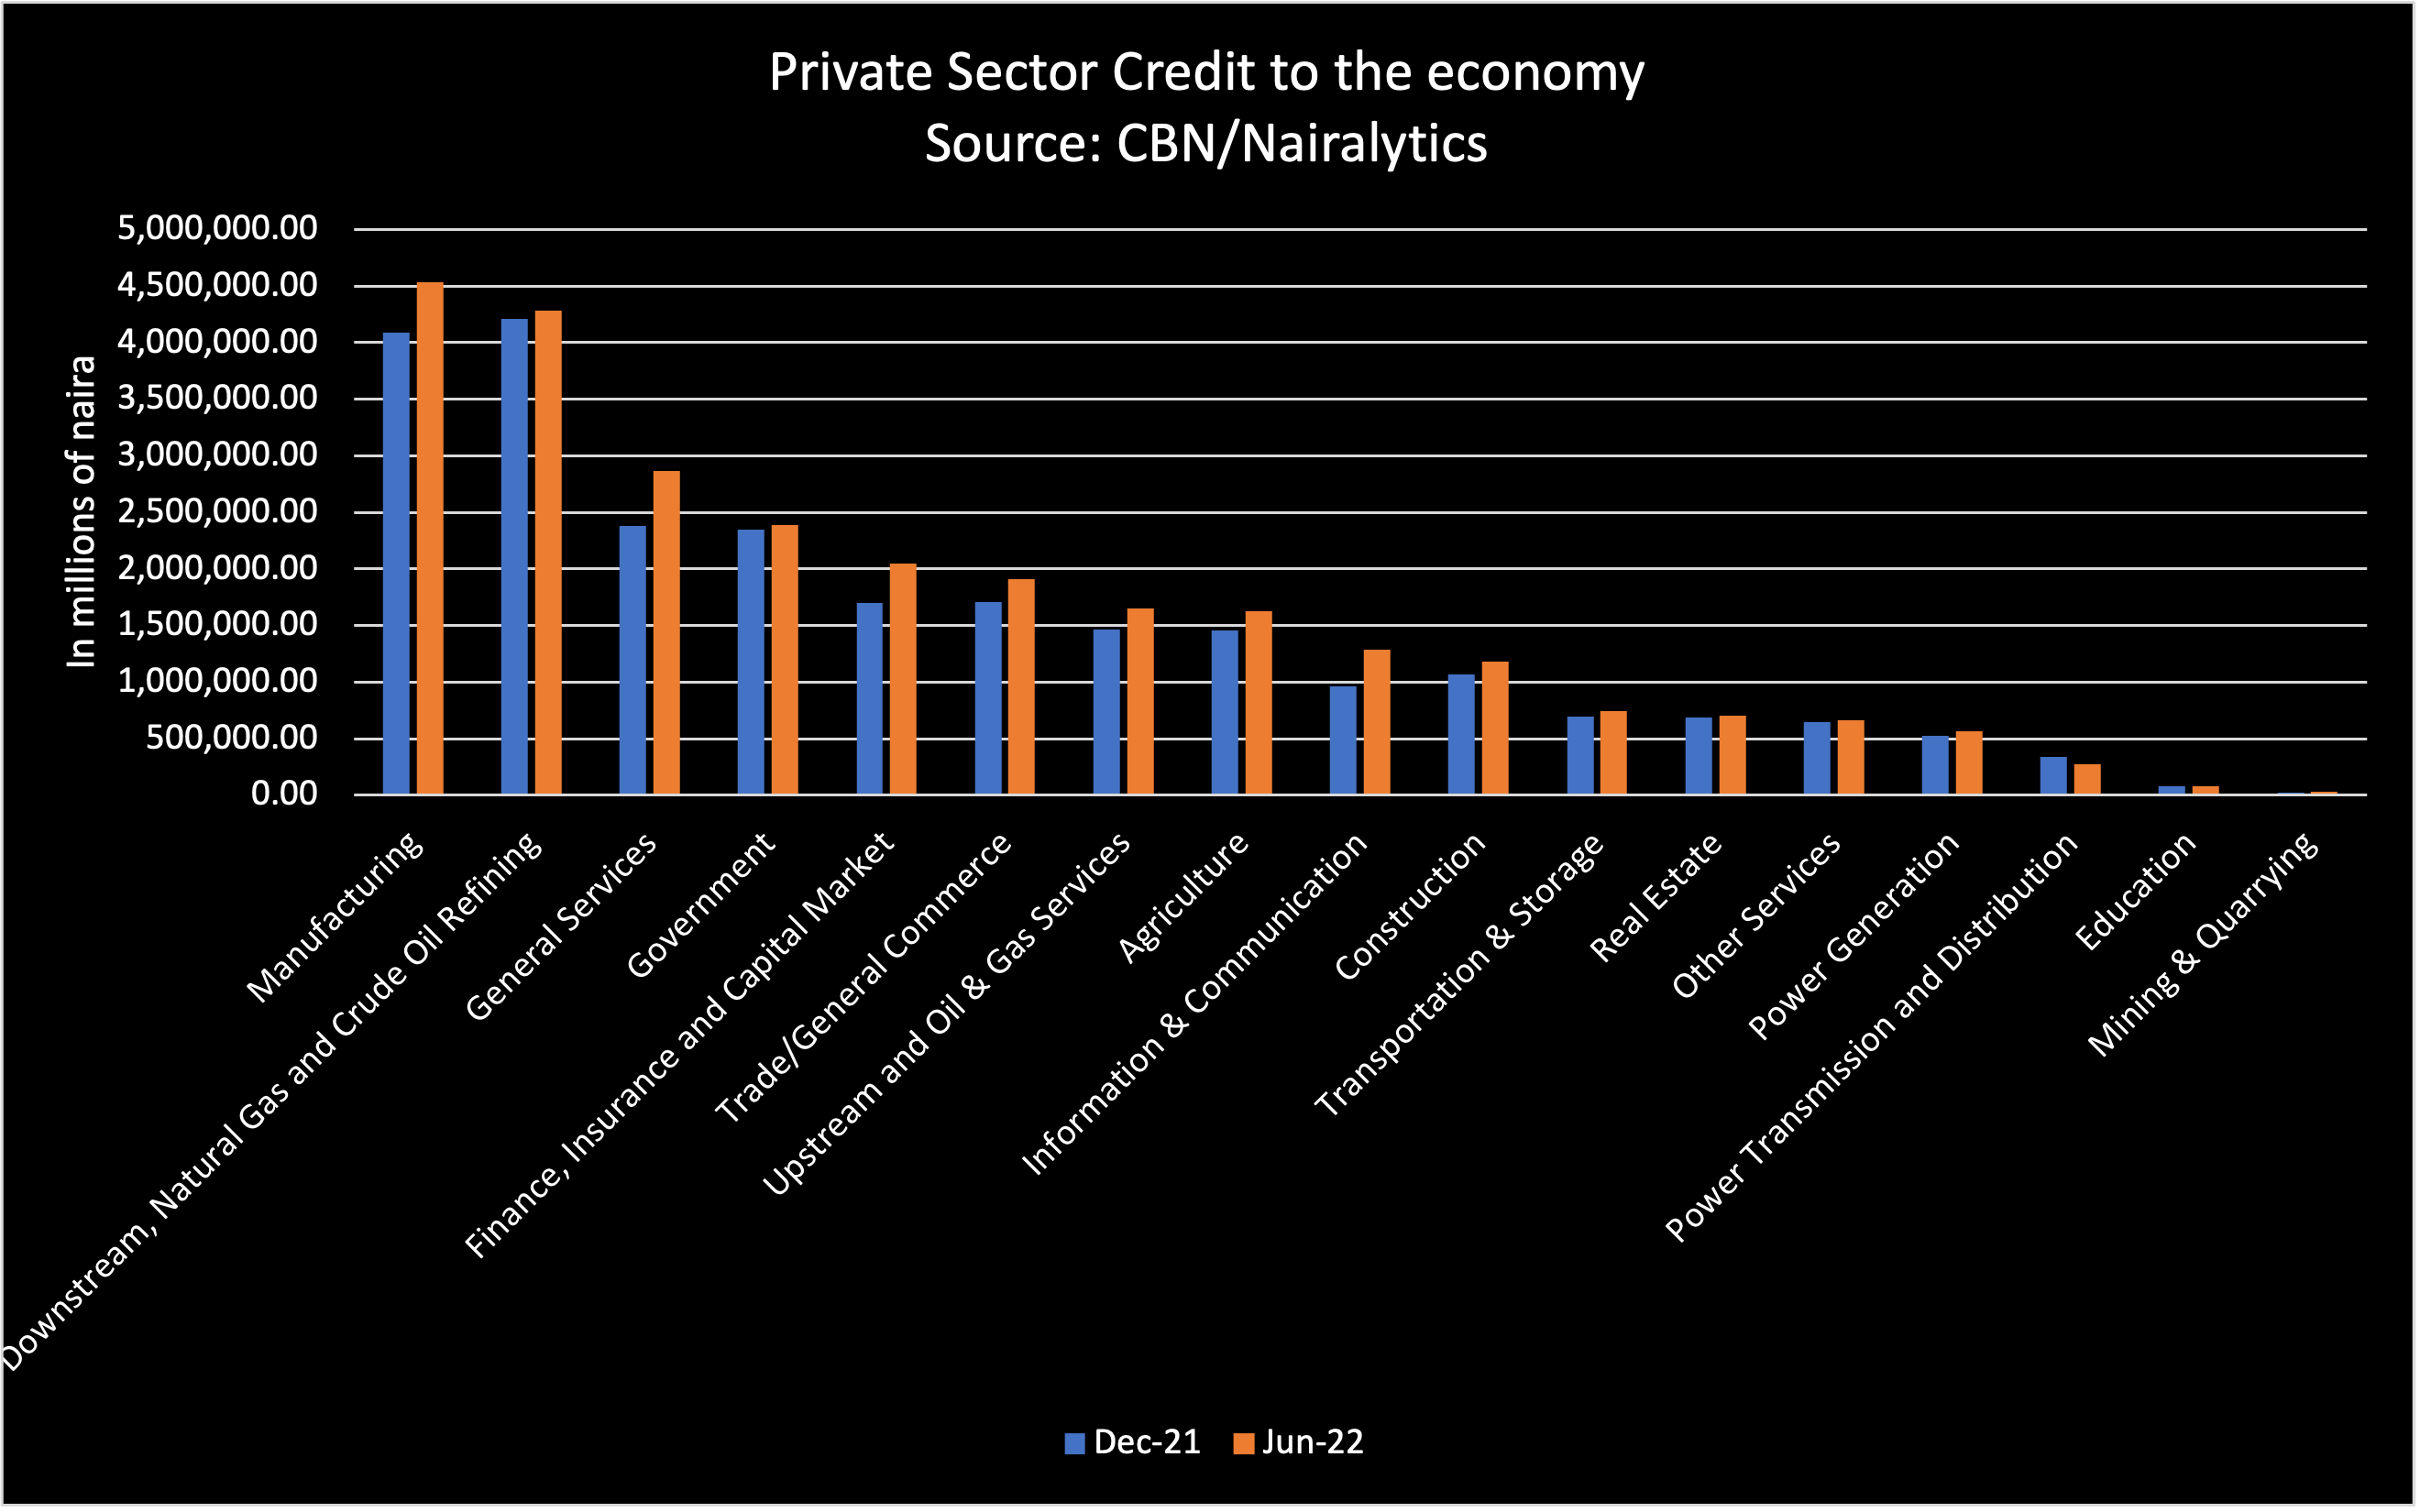 Banking Sector credit to the Private Sector Source: CBN/Nairalytics